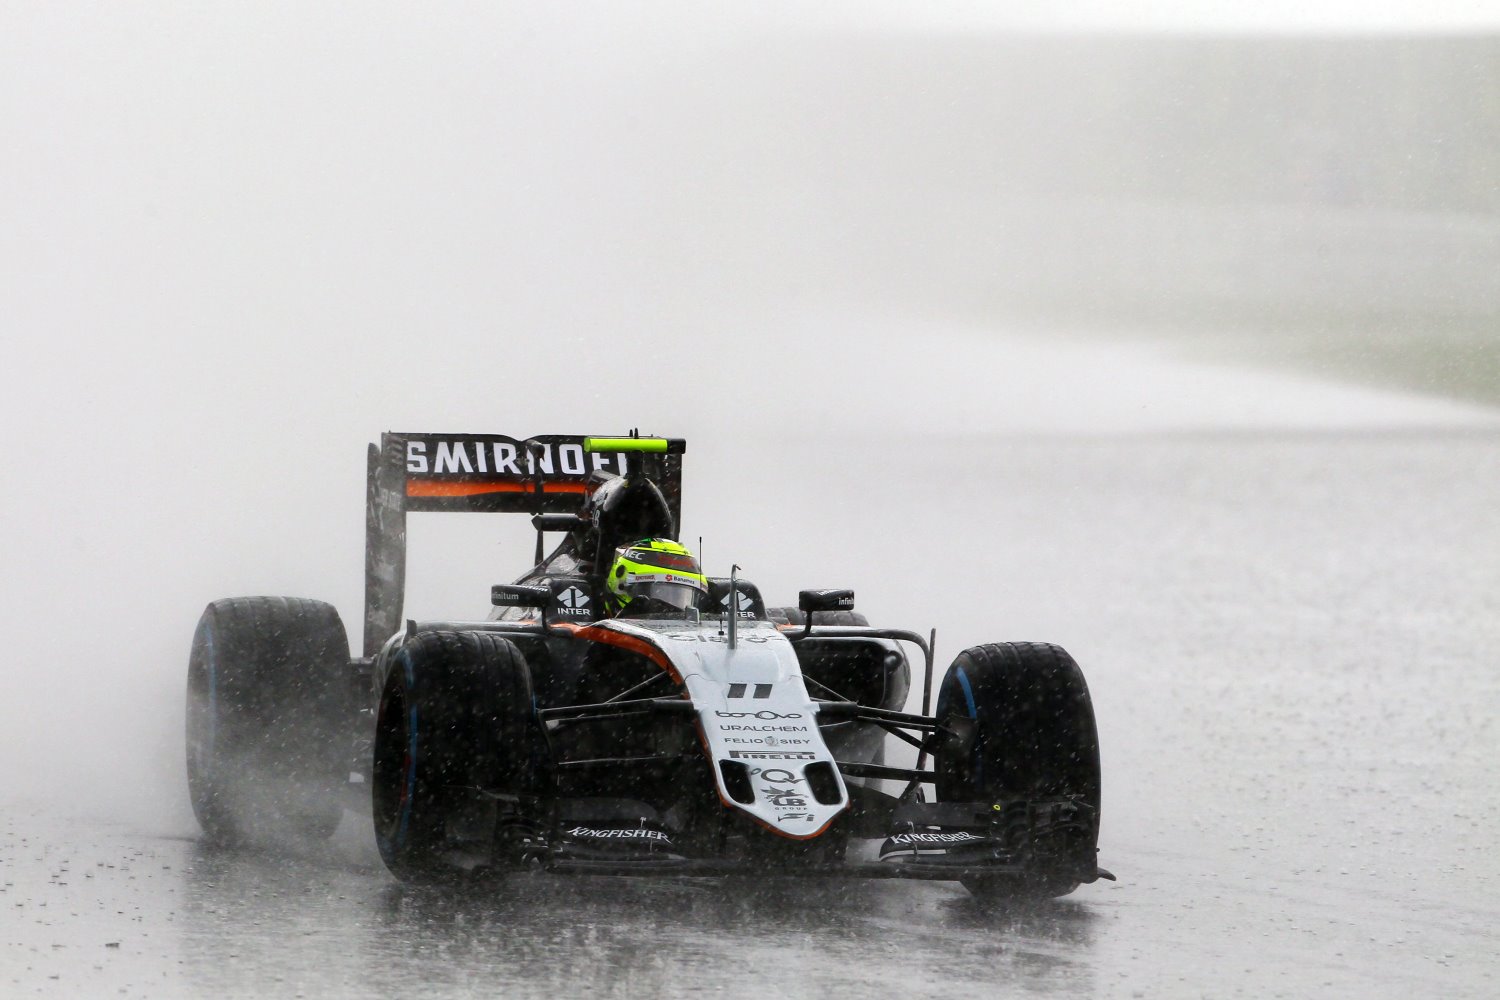 The rain was very bad in Q1